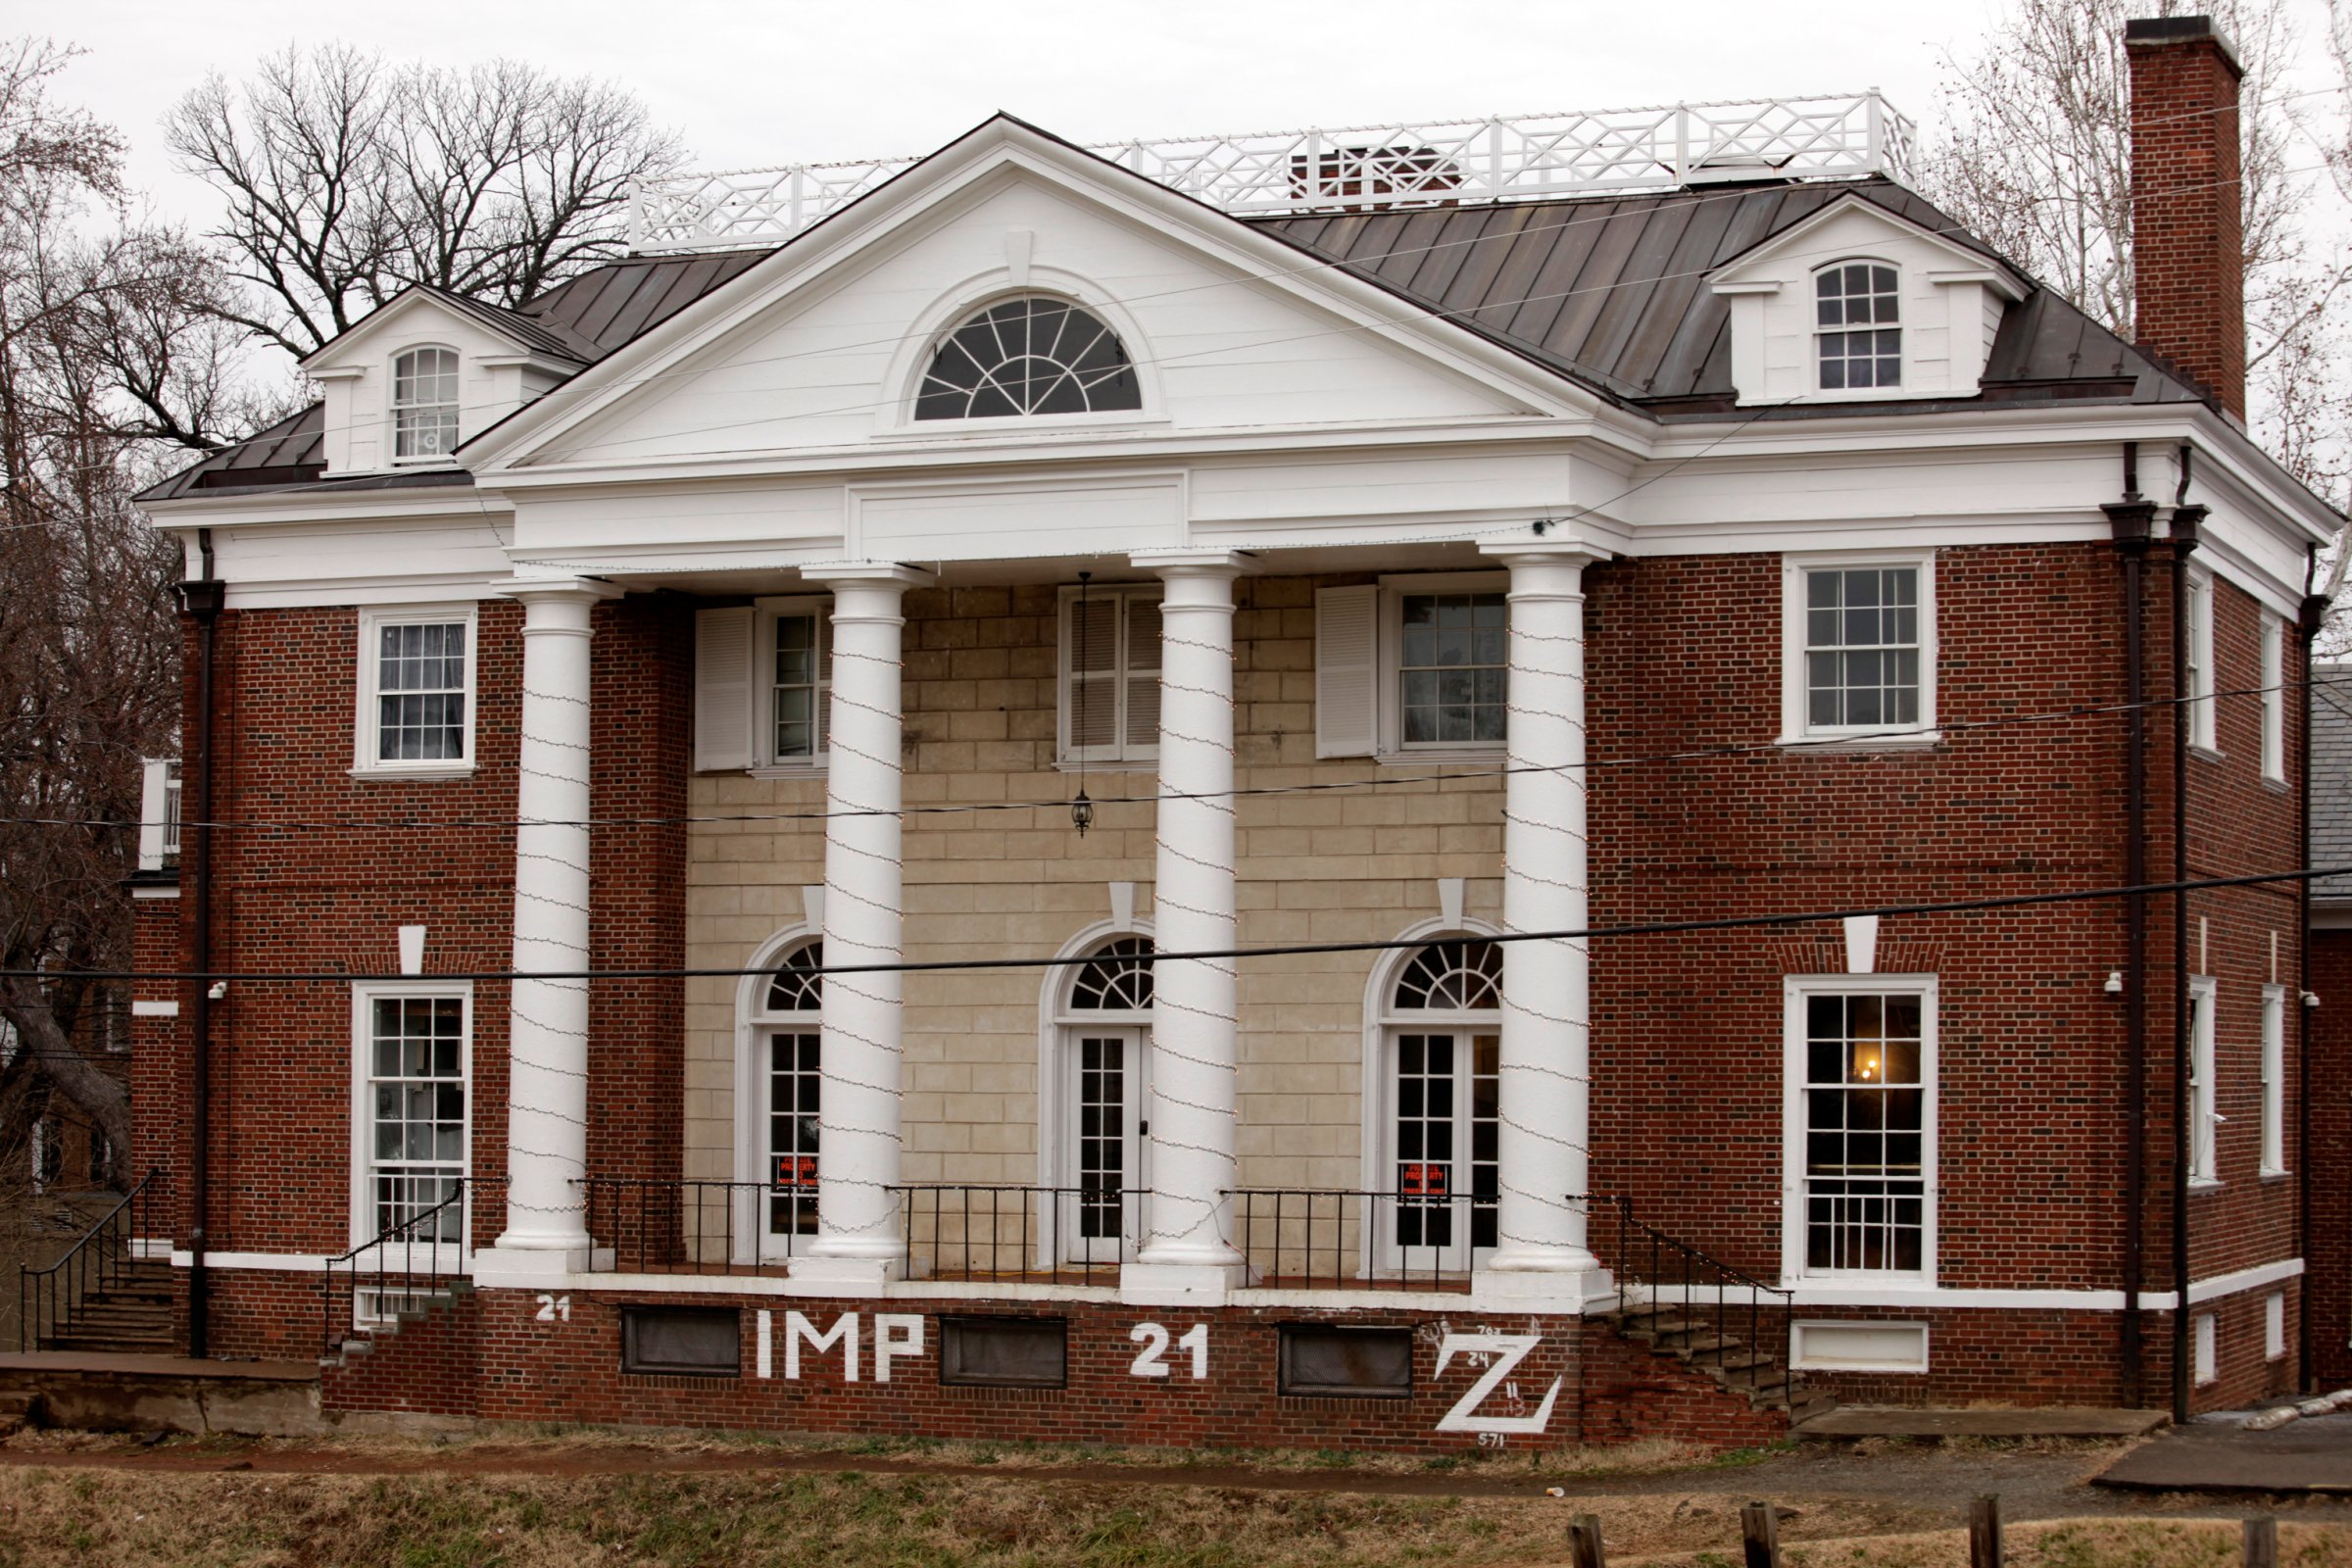 University Of Virginia Fraternity At Center Of Disputed Rolling Stone Magazine Story On Alleged Gang Rape Incident